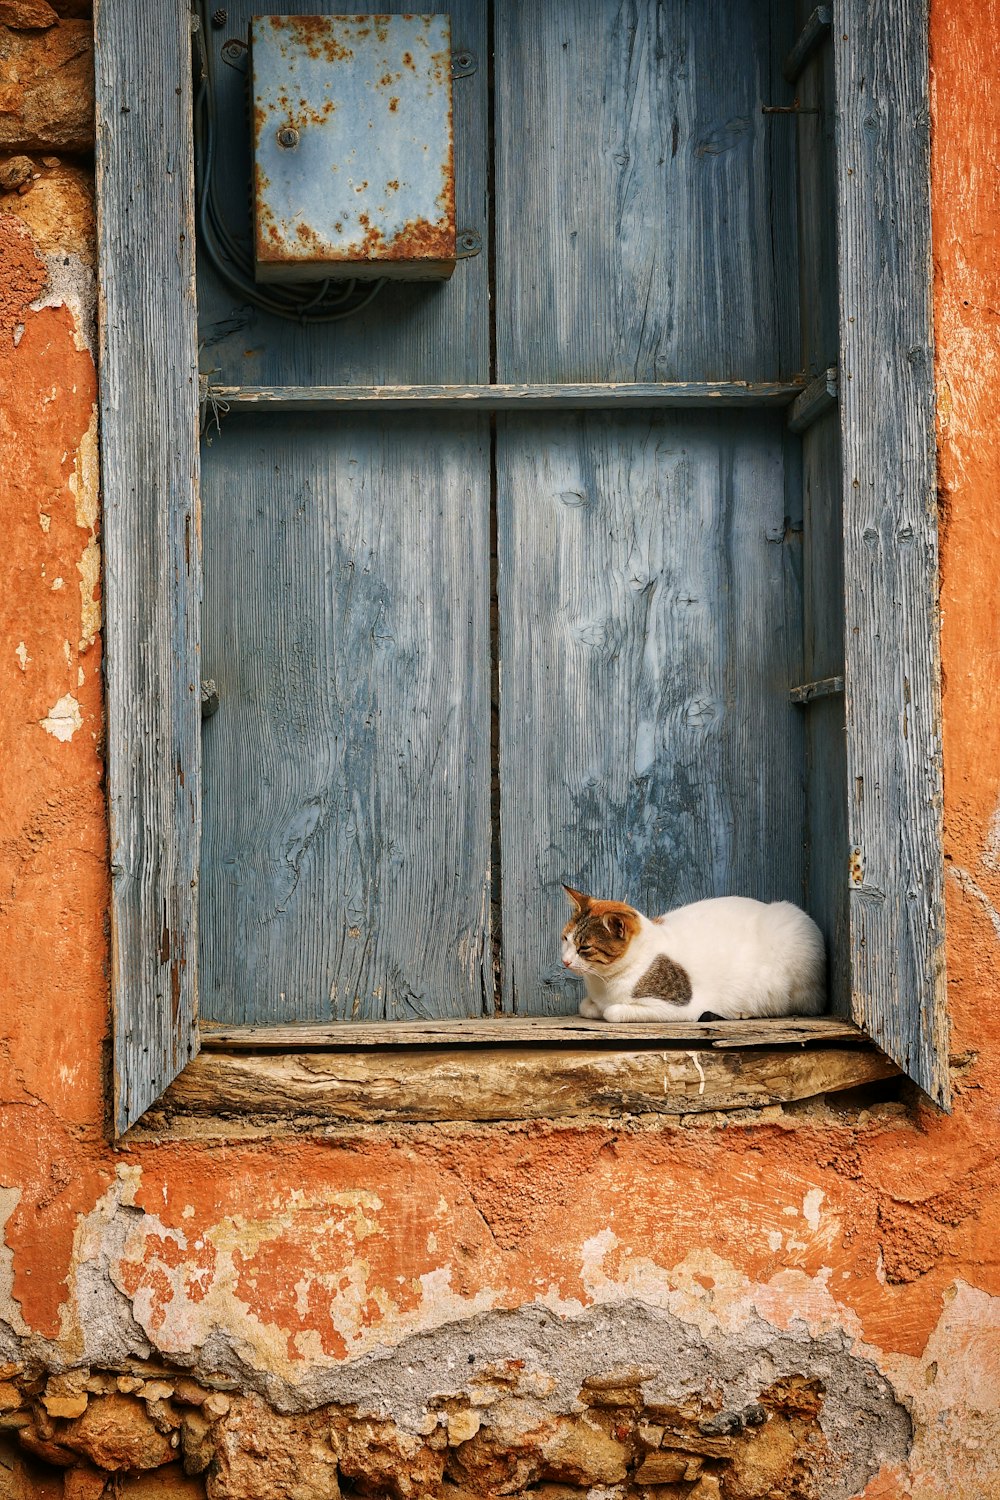 white cat sitting front of wooden window